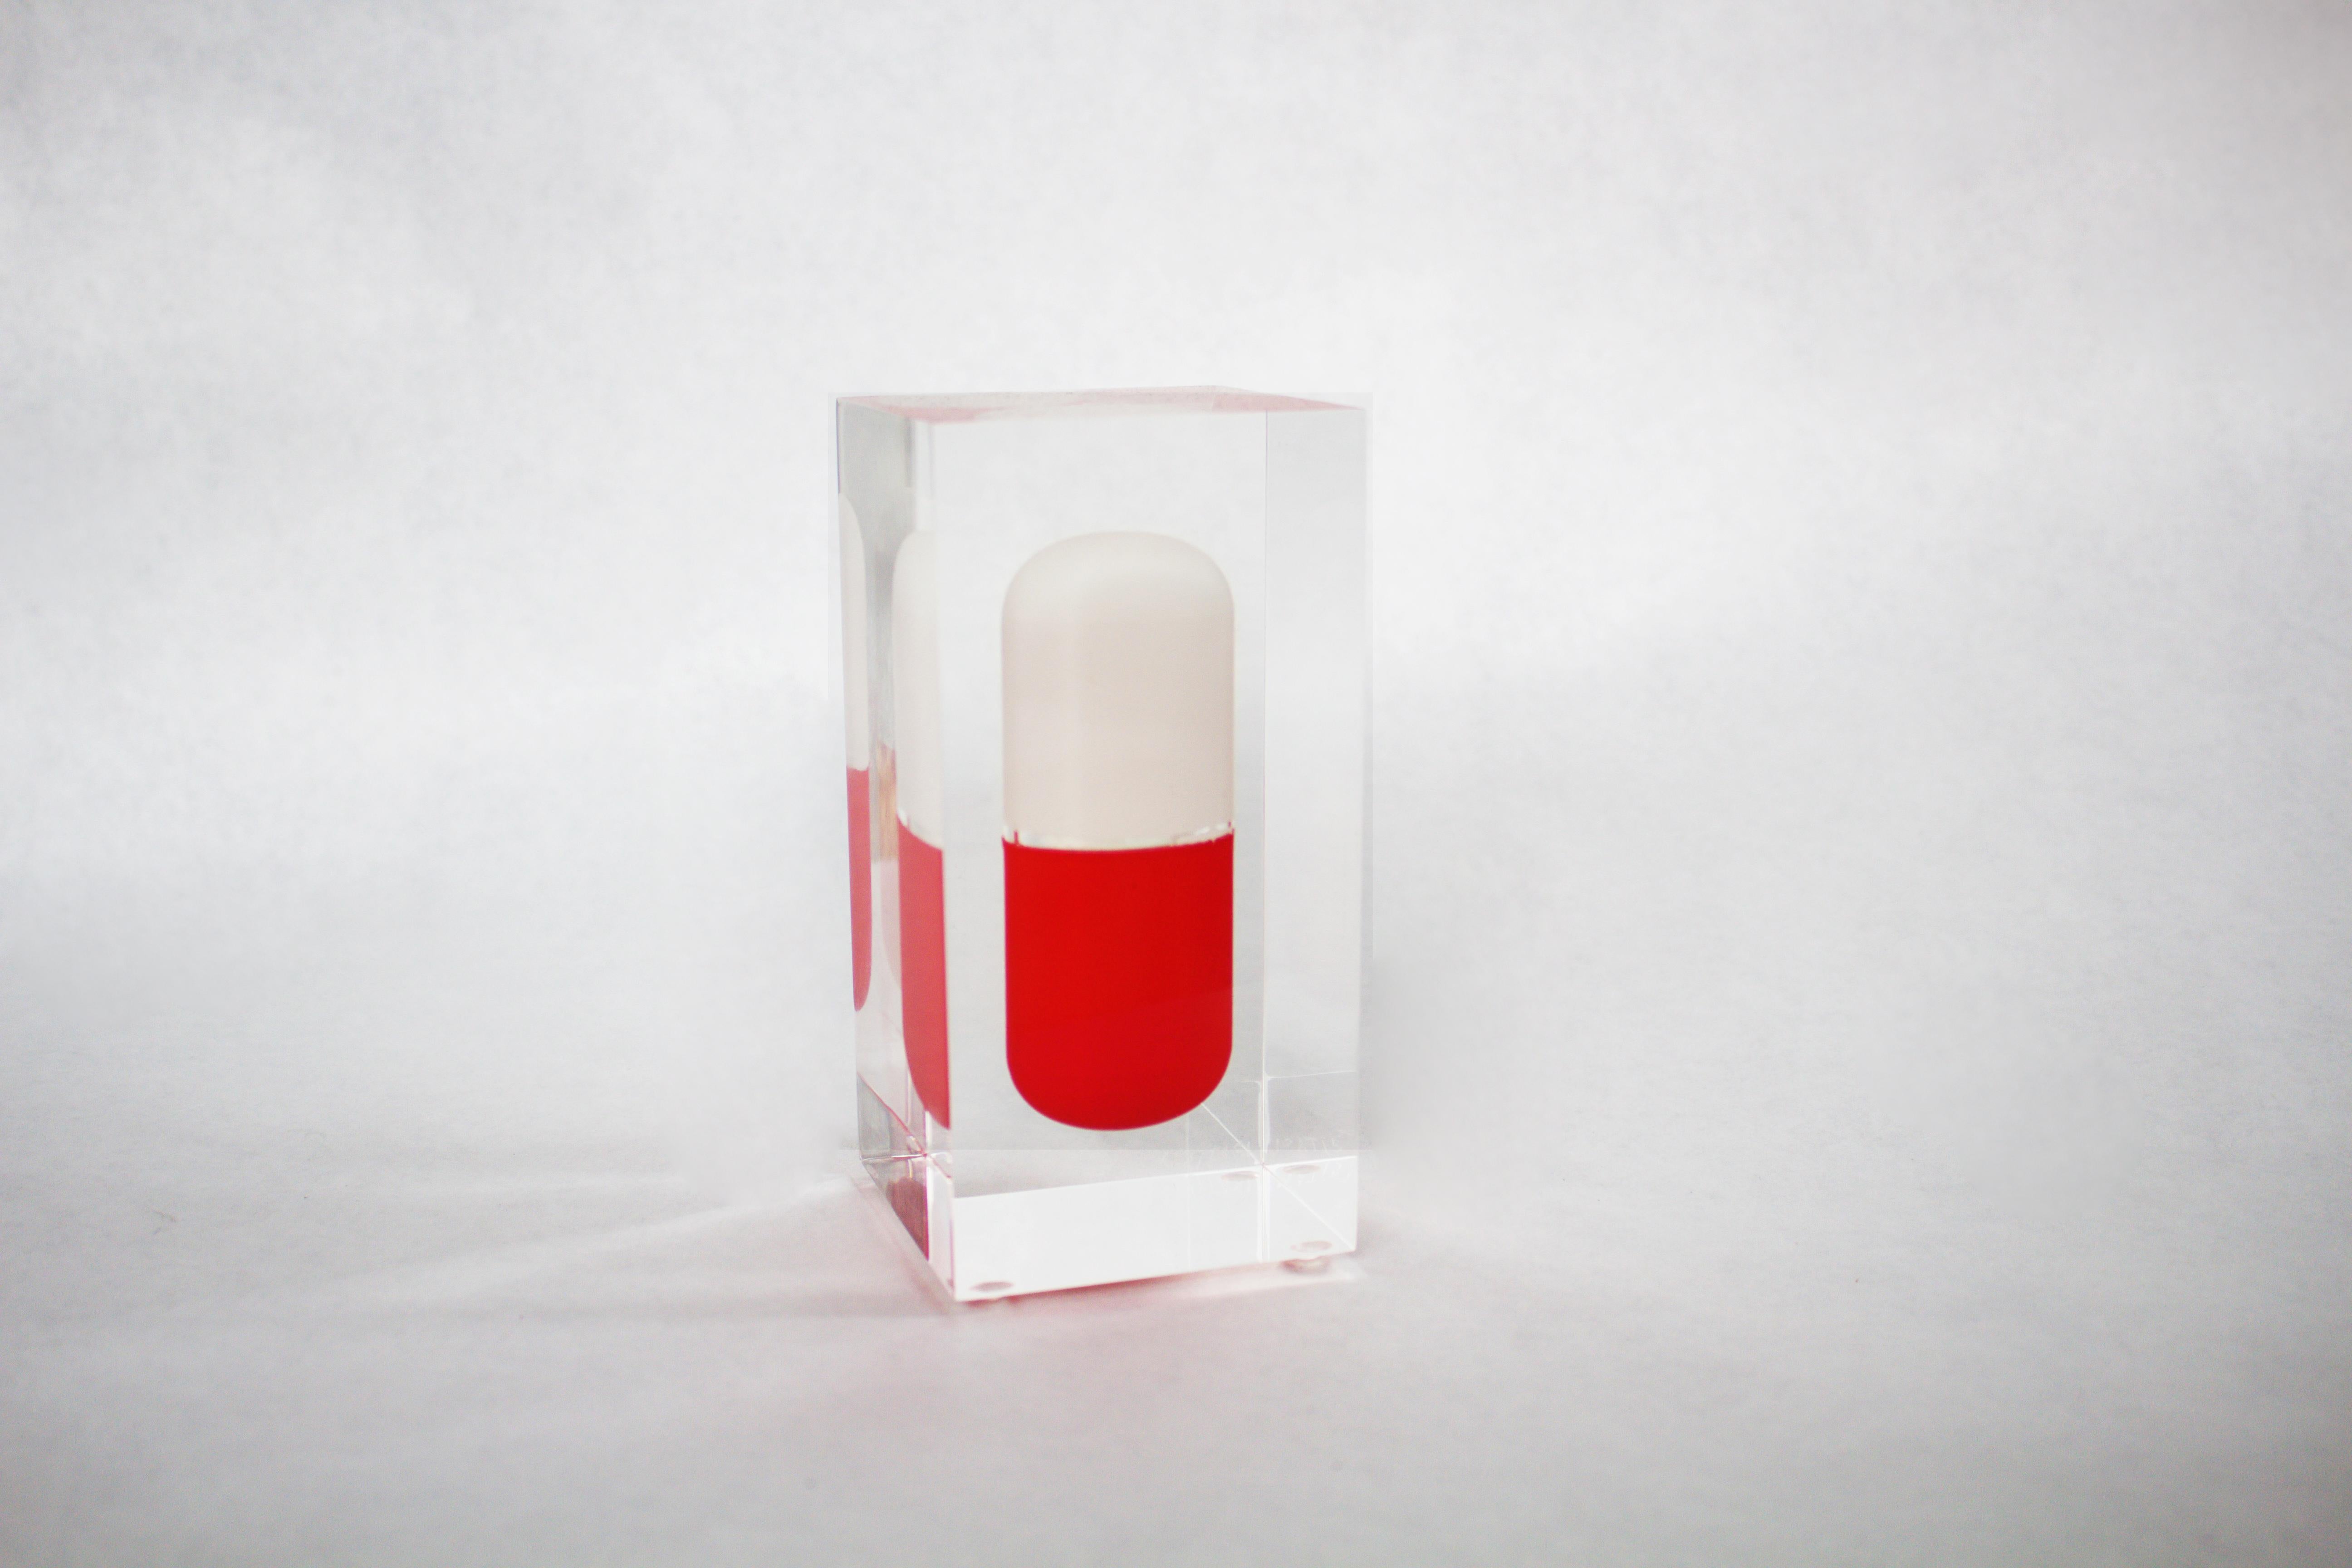 Tiny Red and White Pill  - Pop Art Sculpture by Helder Batista